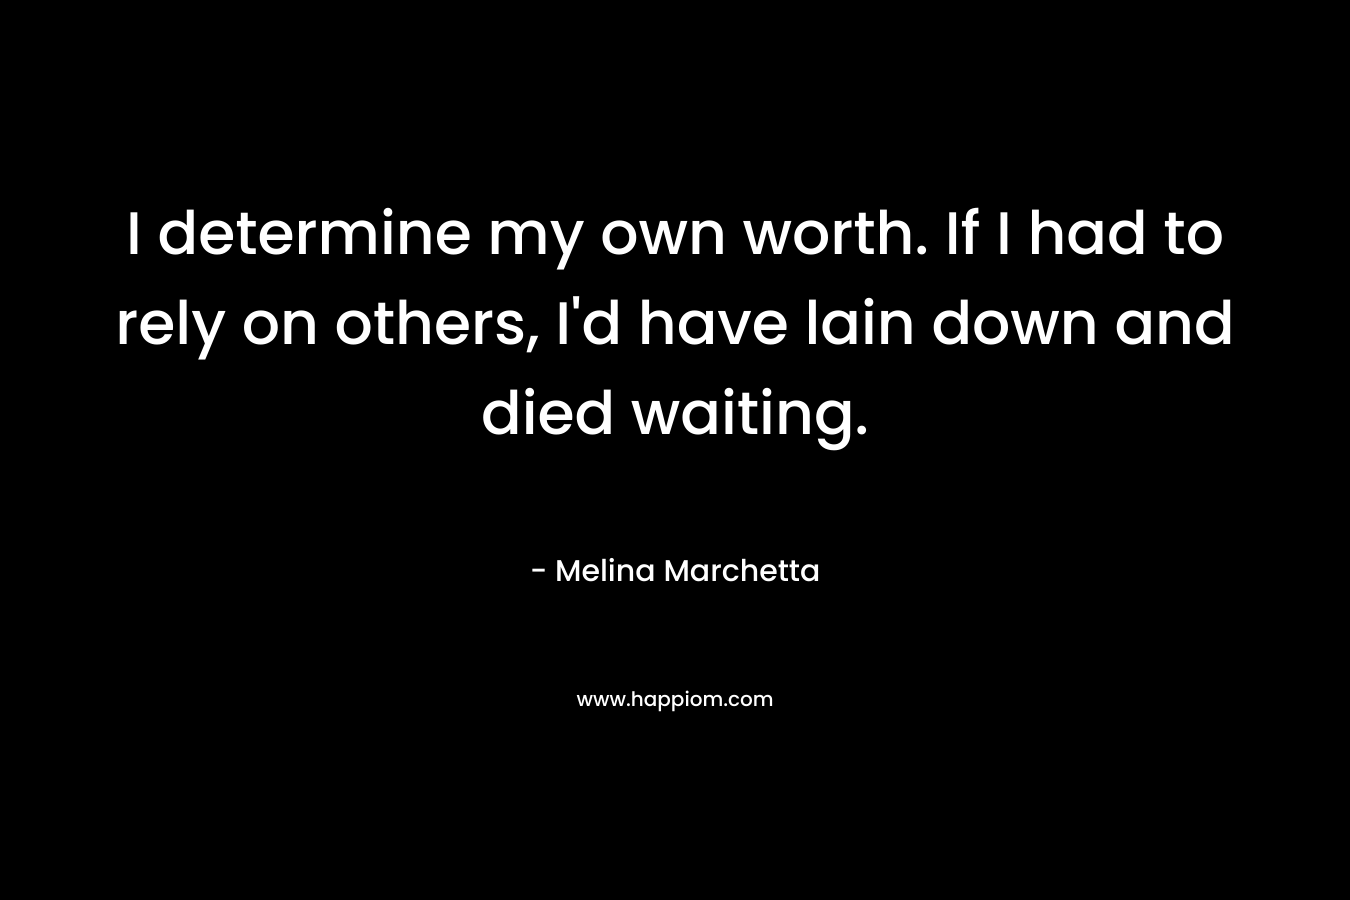 I determine my own worth. If I had to rely on others, I'd have lain down and died waiting.